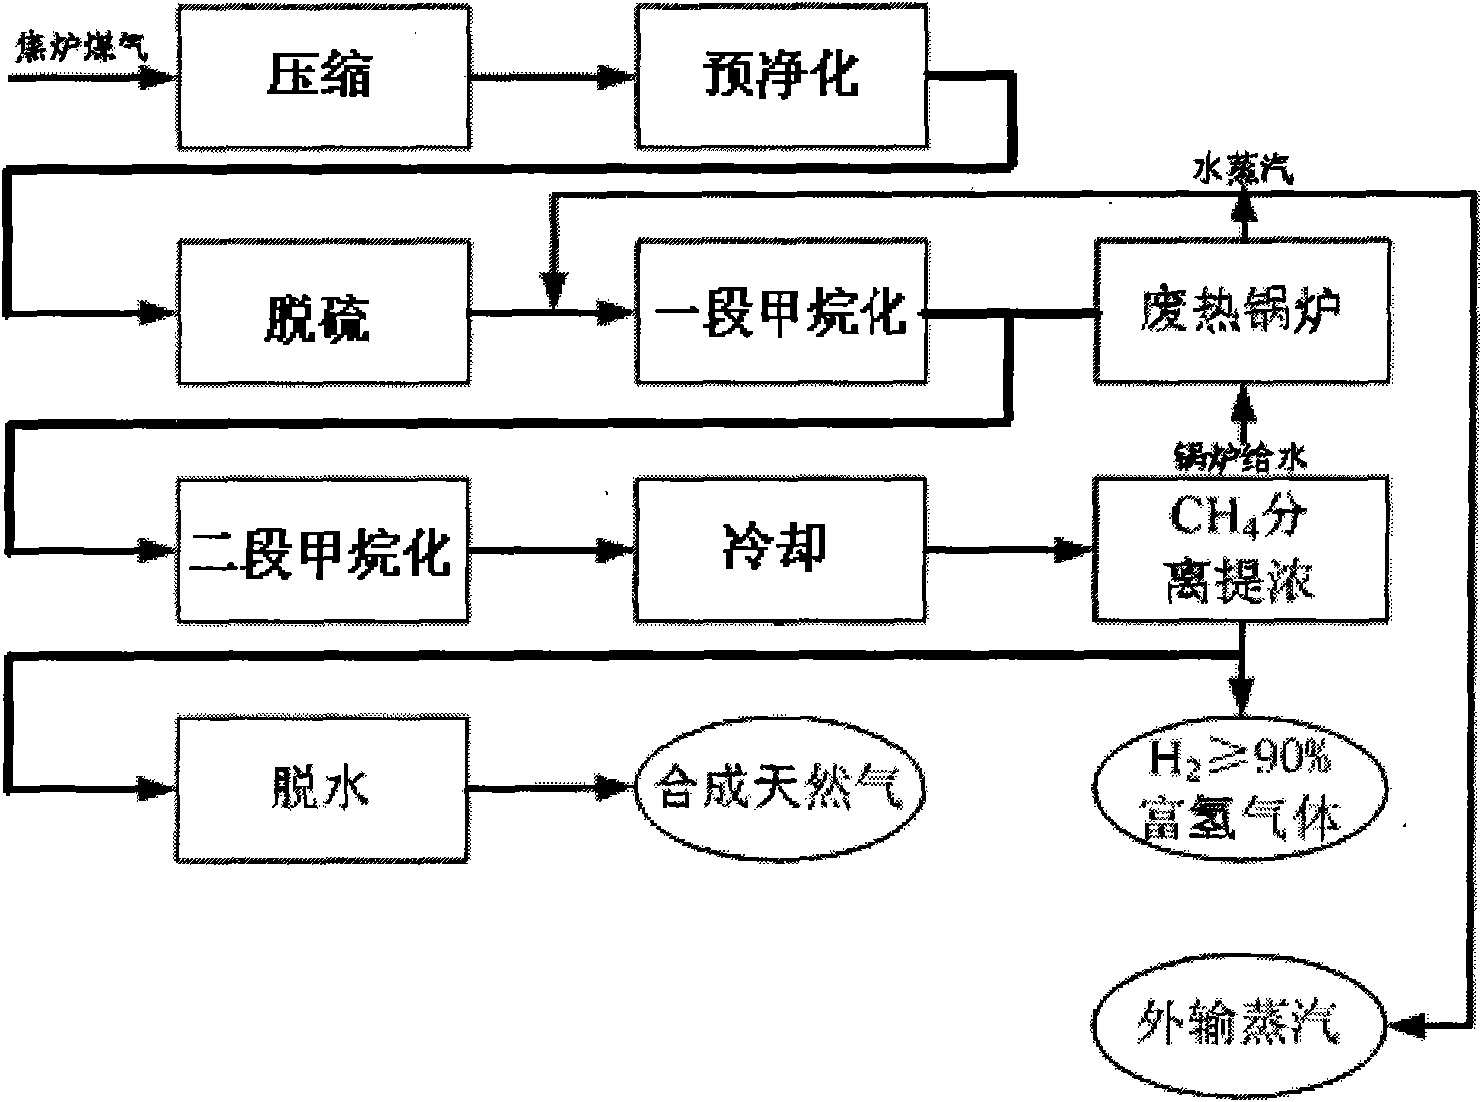 Synthesis process of natural gas employing methanation of coke oven gas